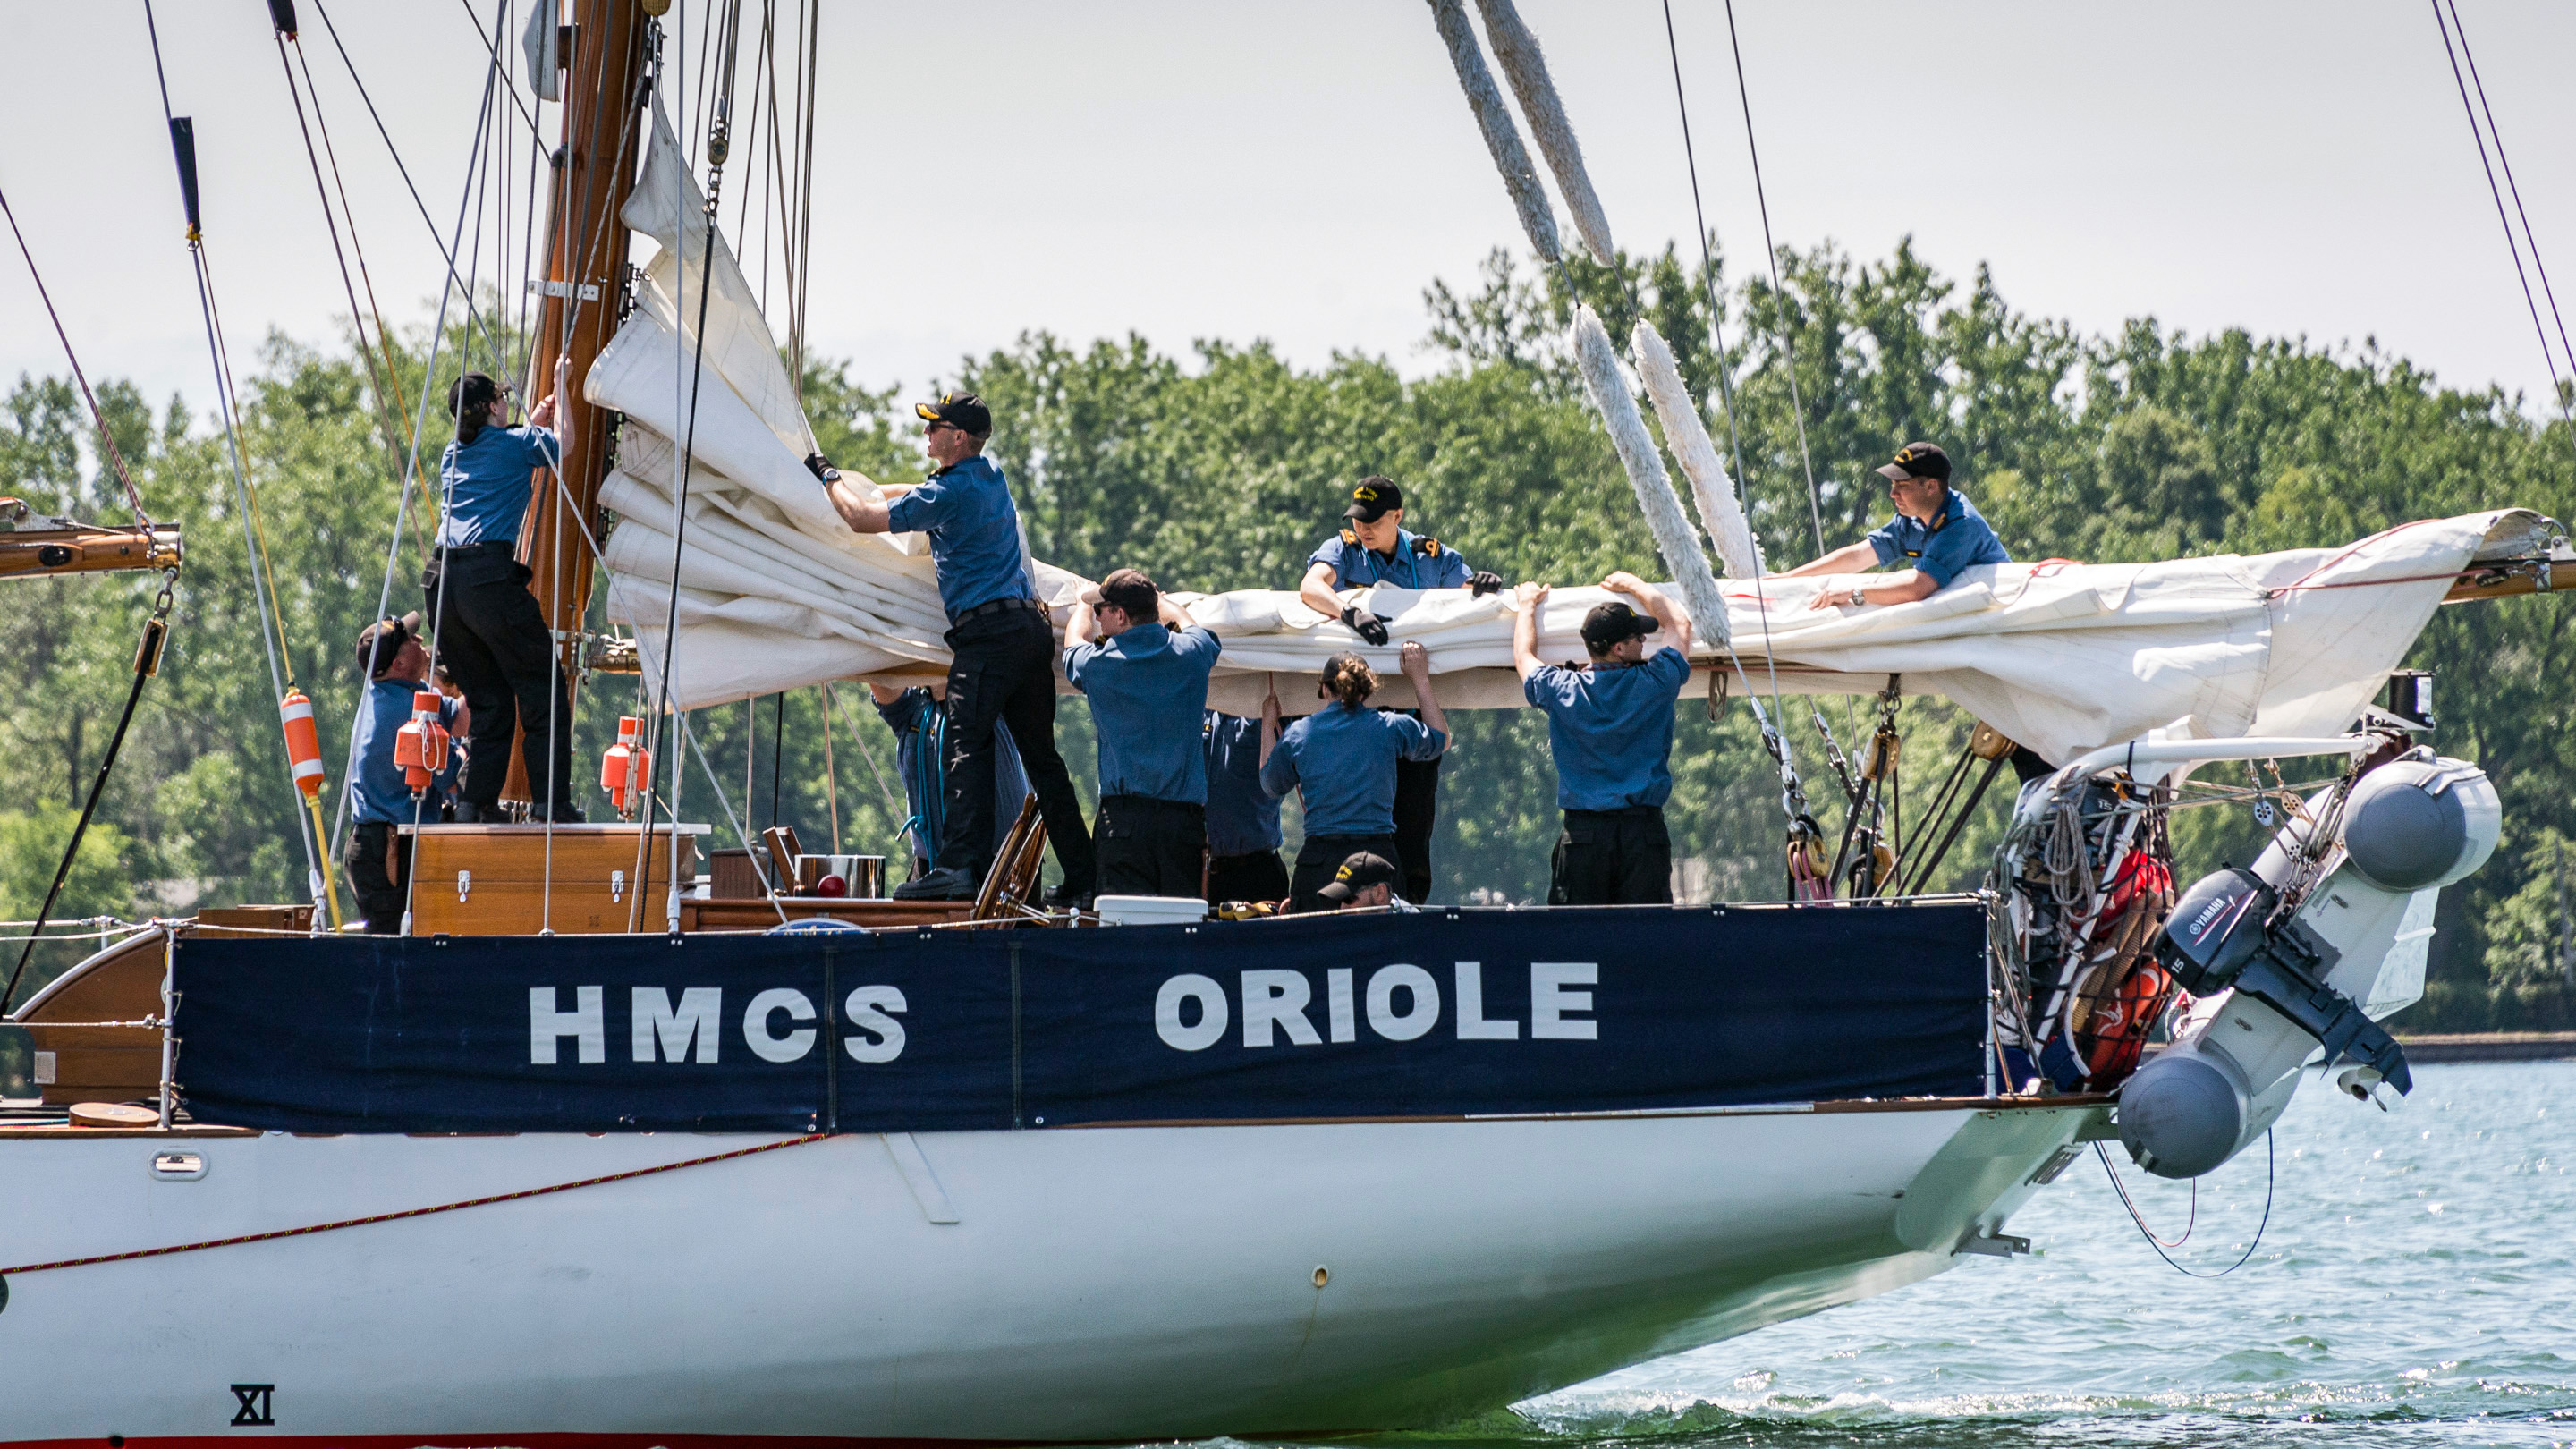 Slide - Crewmembers aboard the HMCS Oriole flake and secure the mizzen sail 